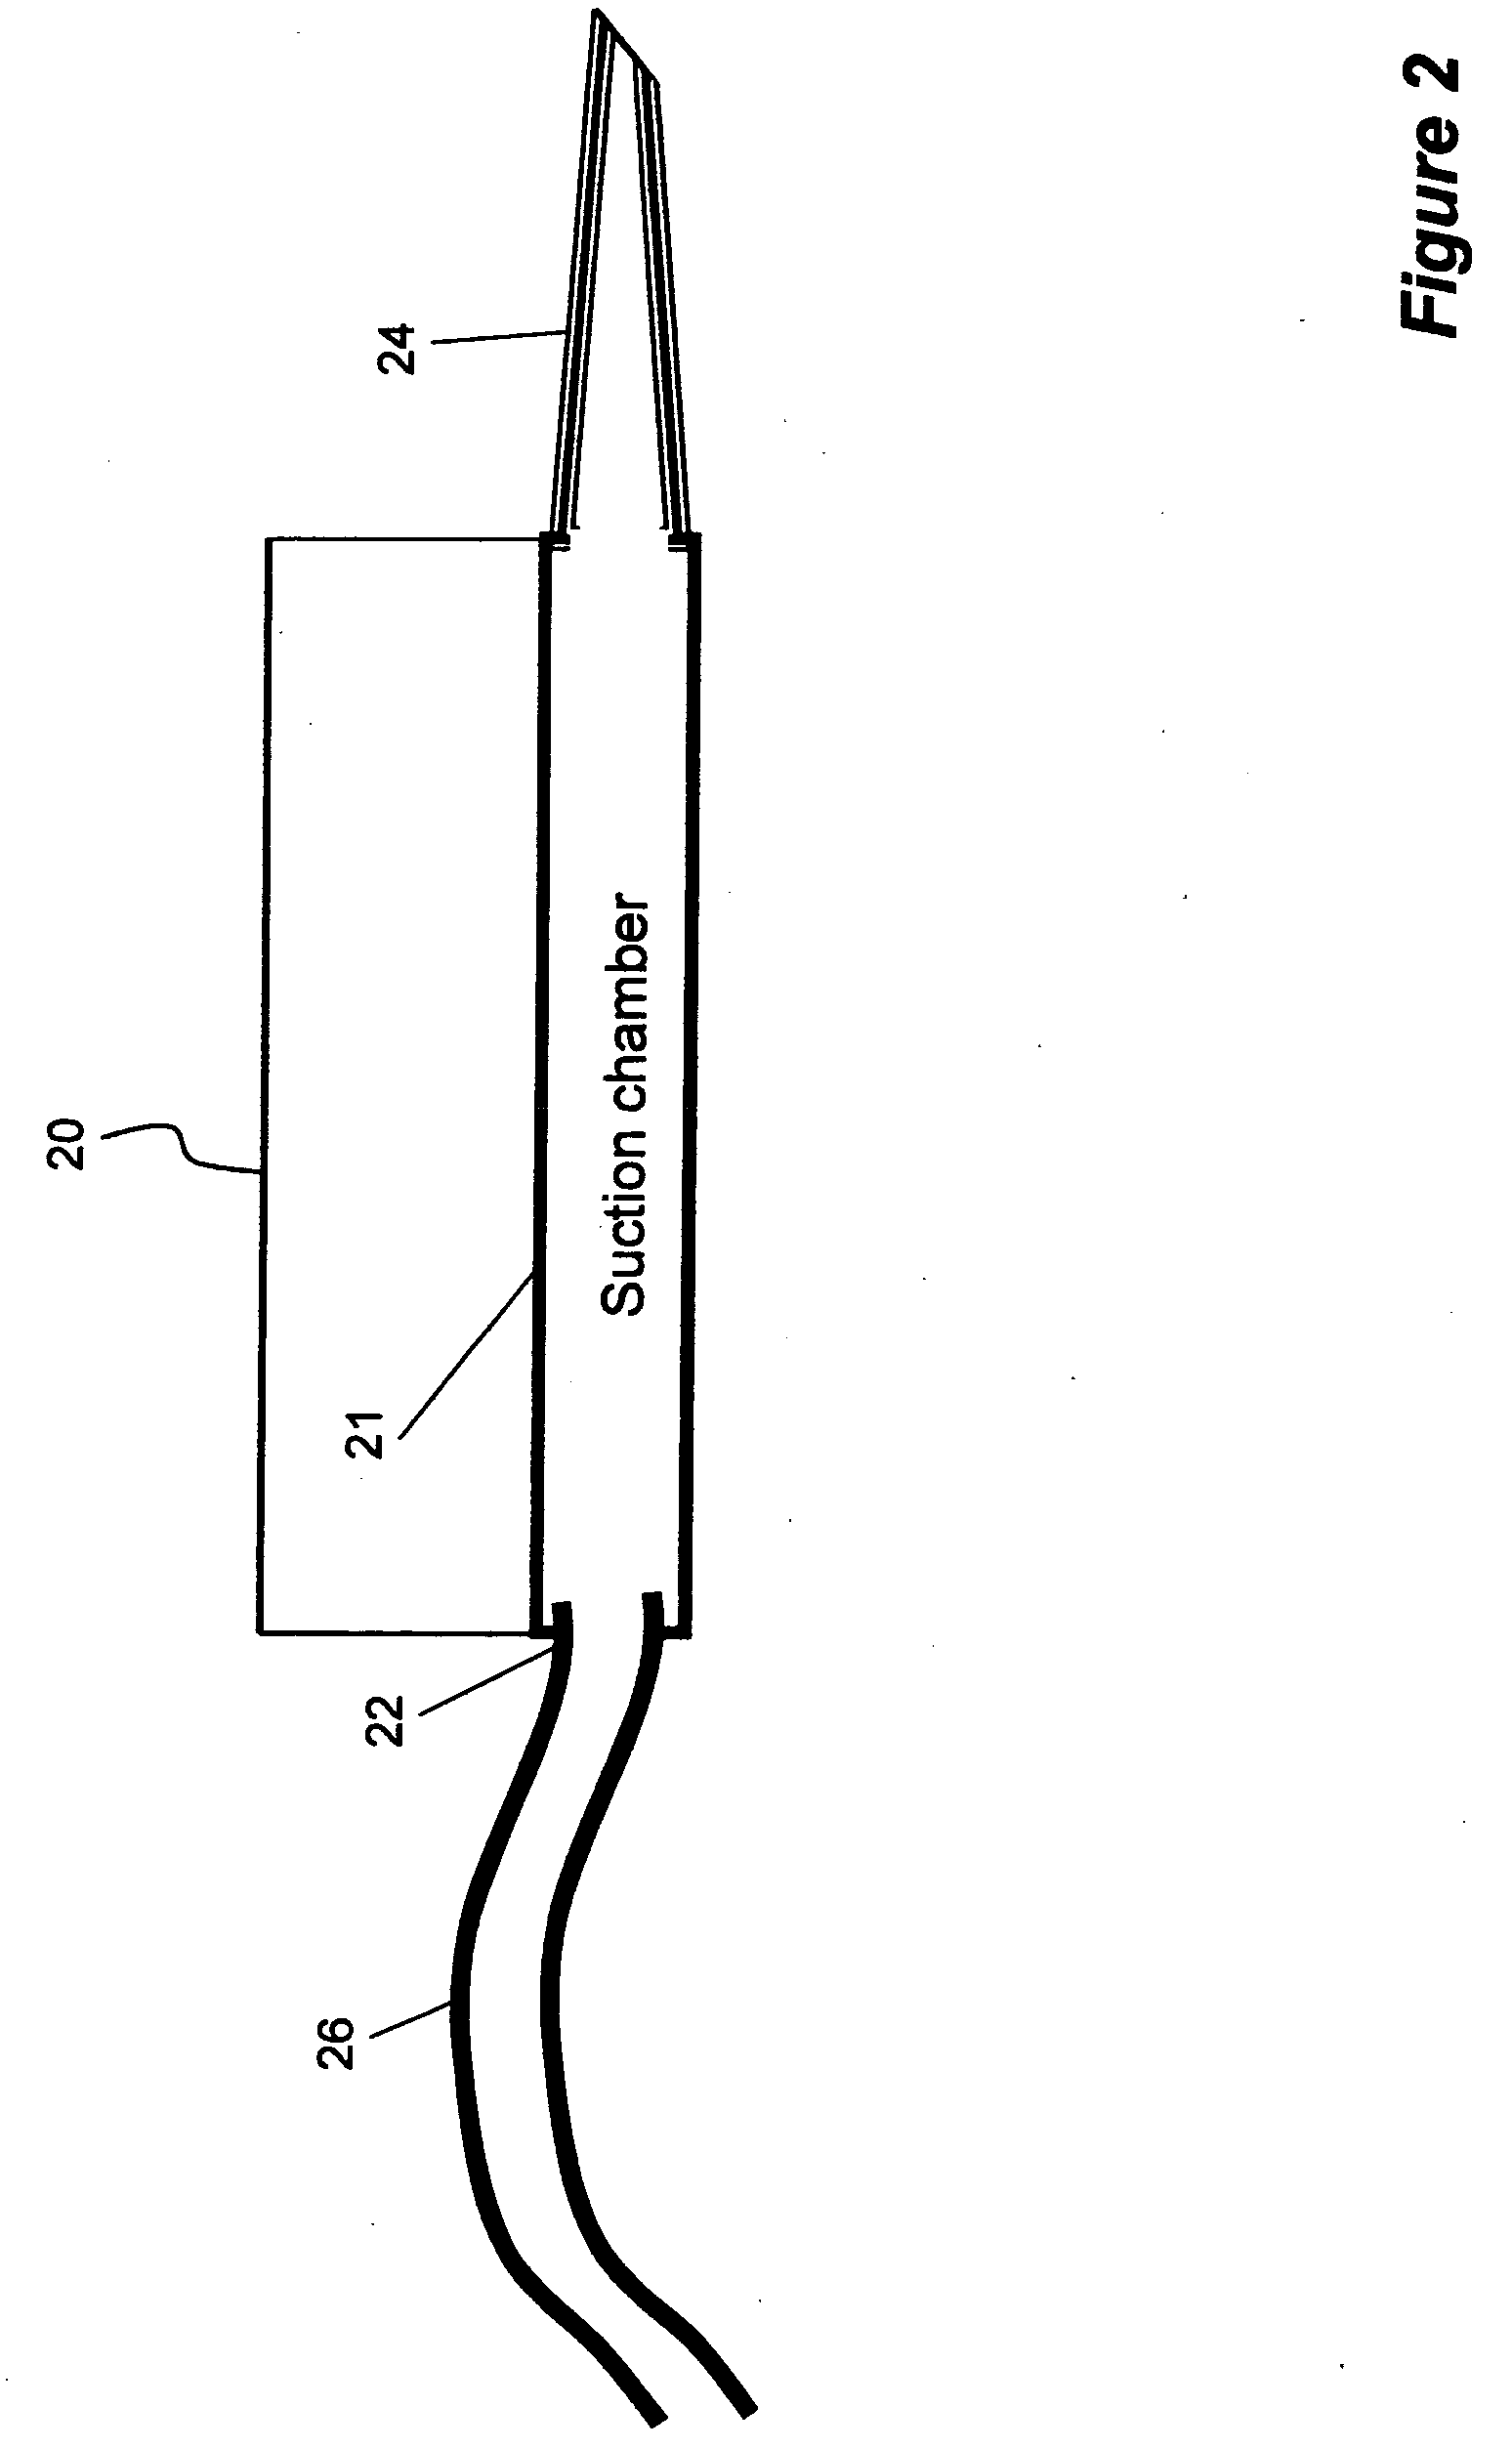 Apparatus and method for ablating deposits from blood vessel